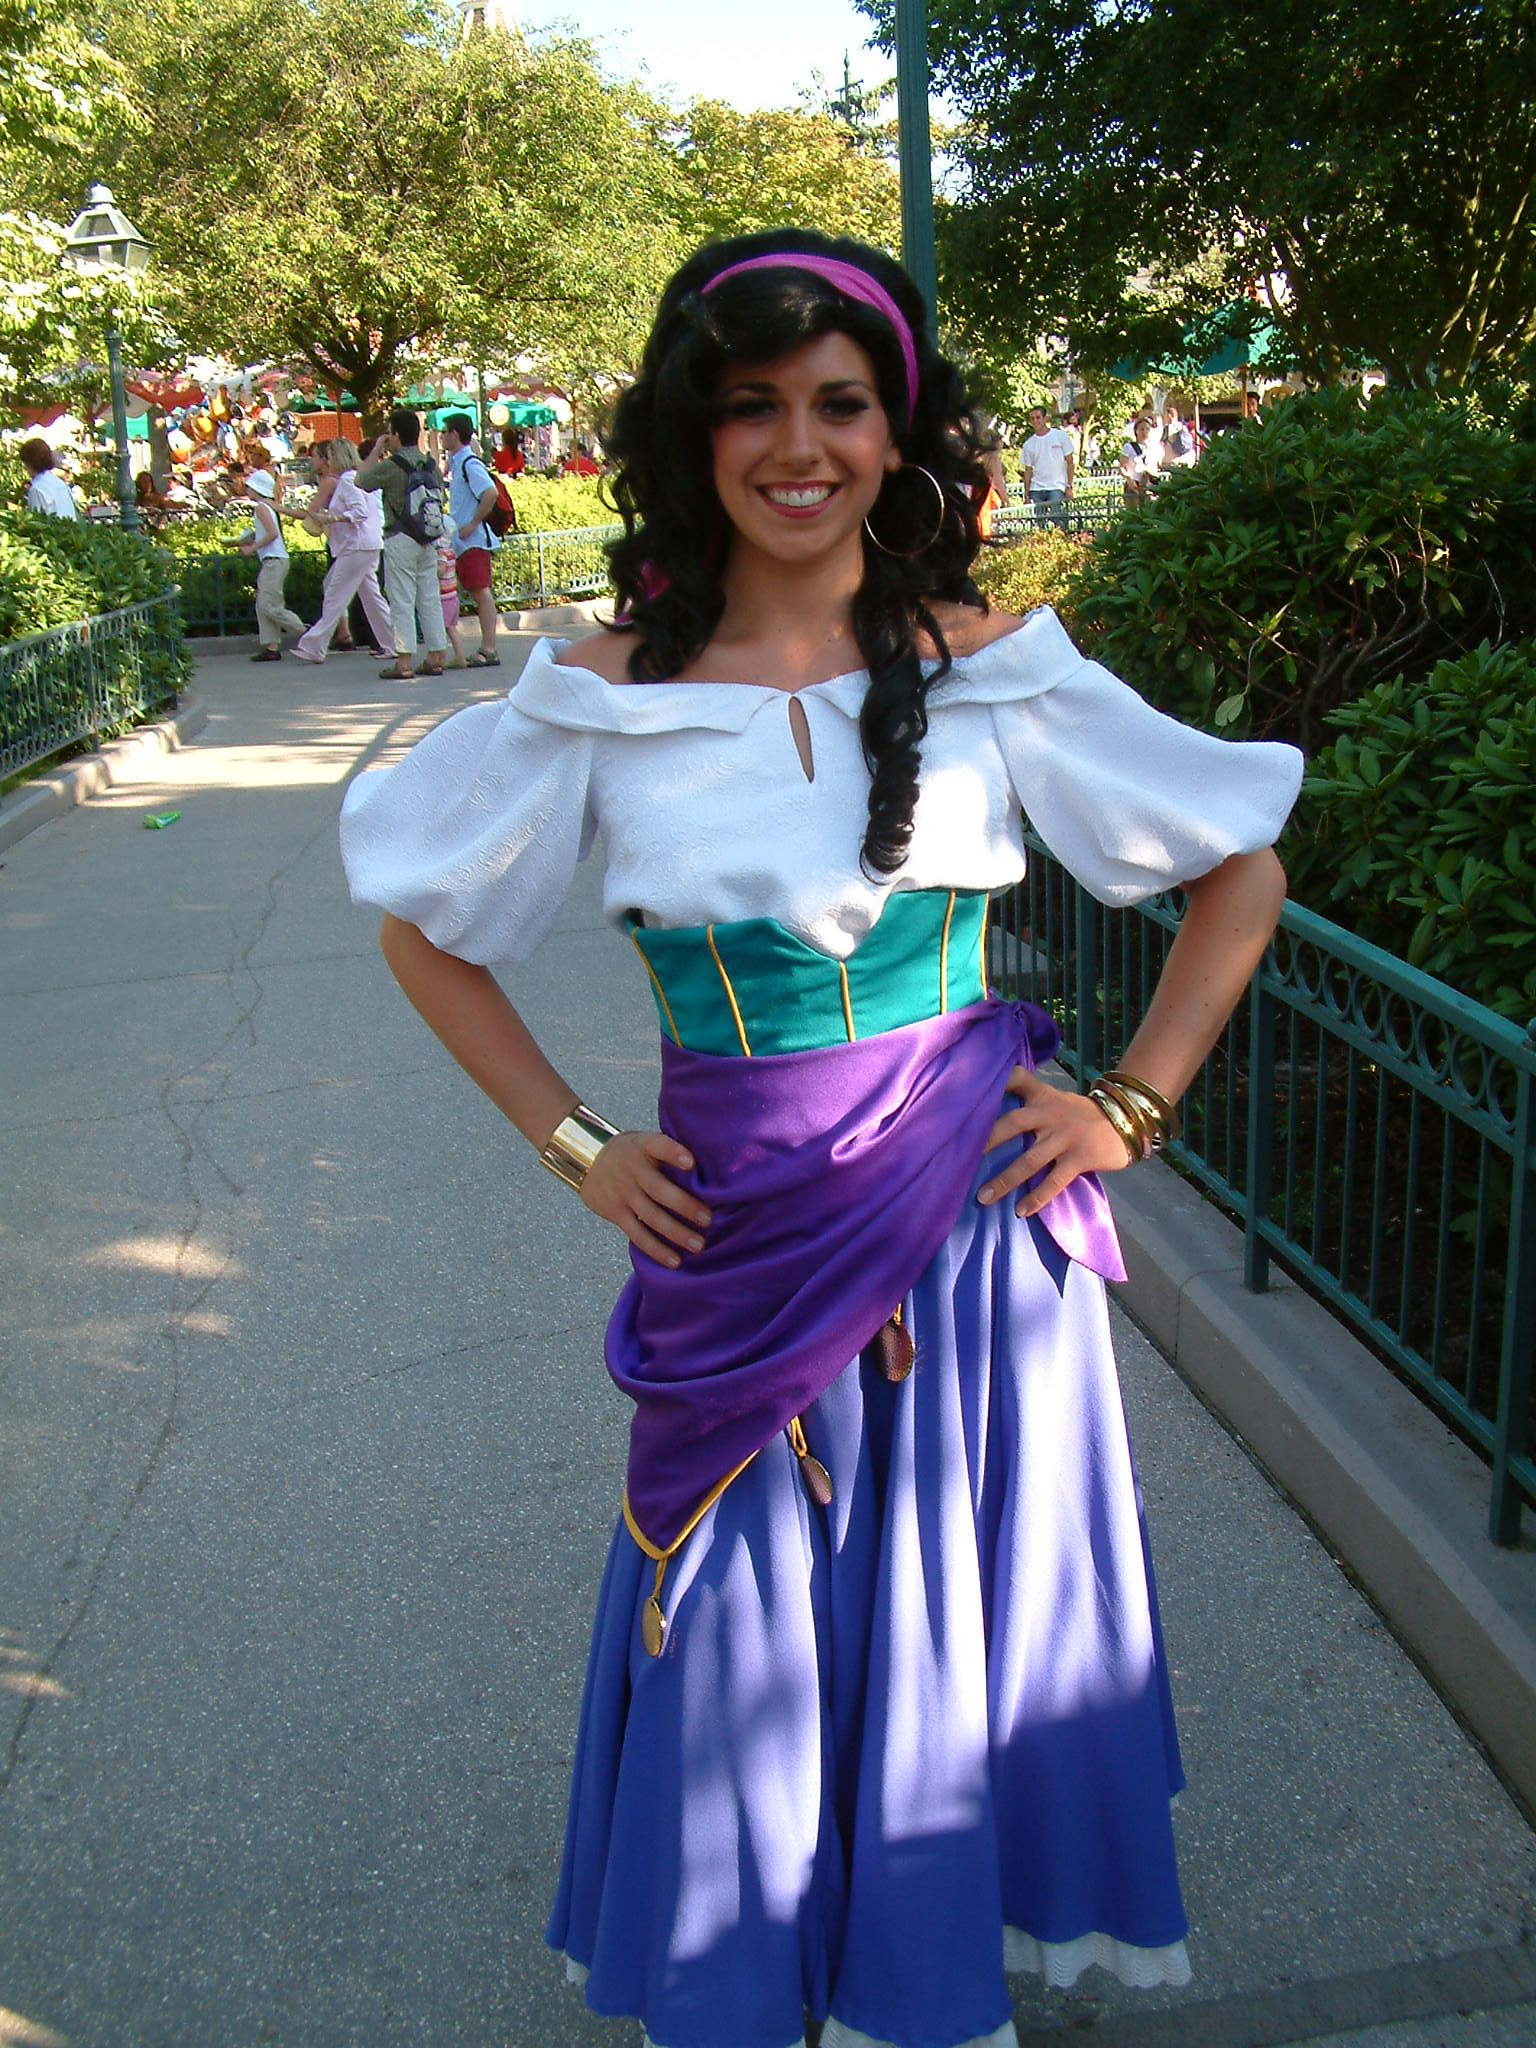 Esmeralda is hard to find at the Parks, but when she is out you can find her in fantasyland most of the time